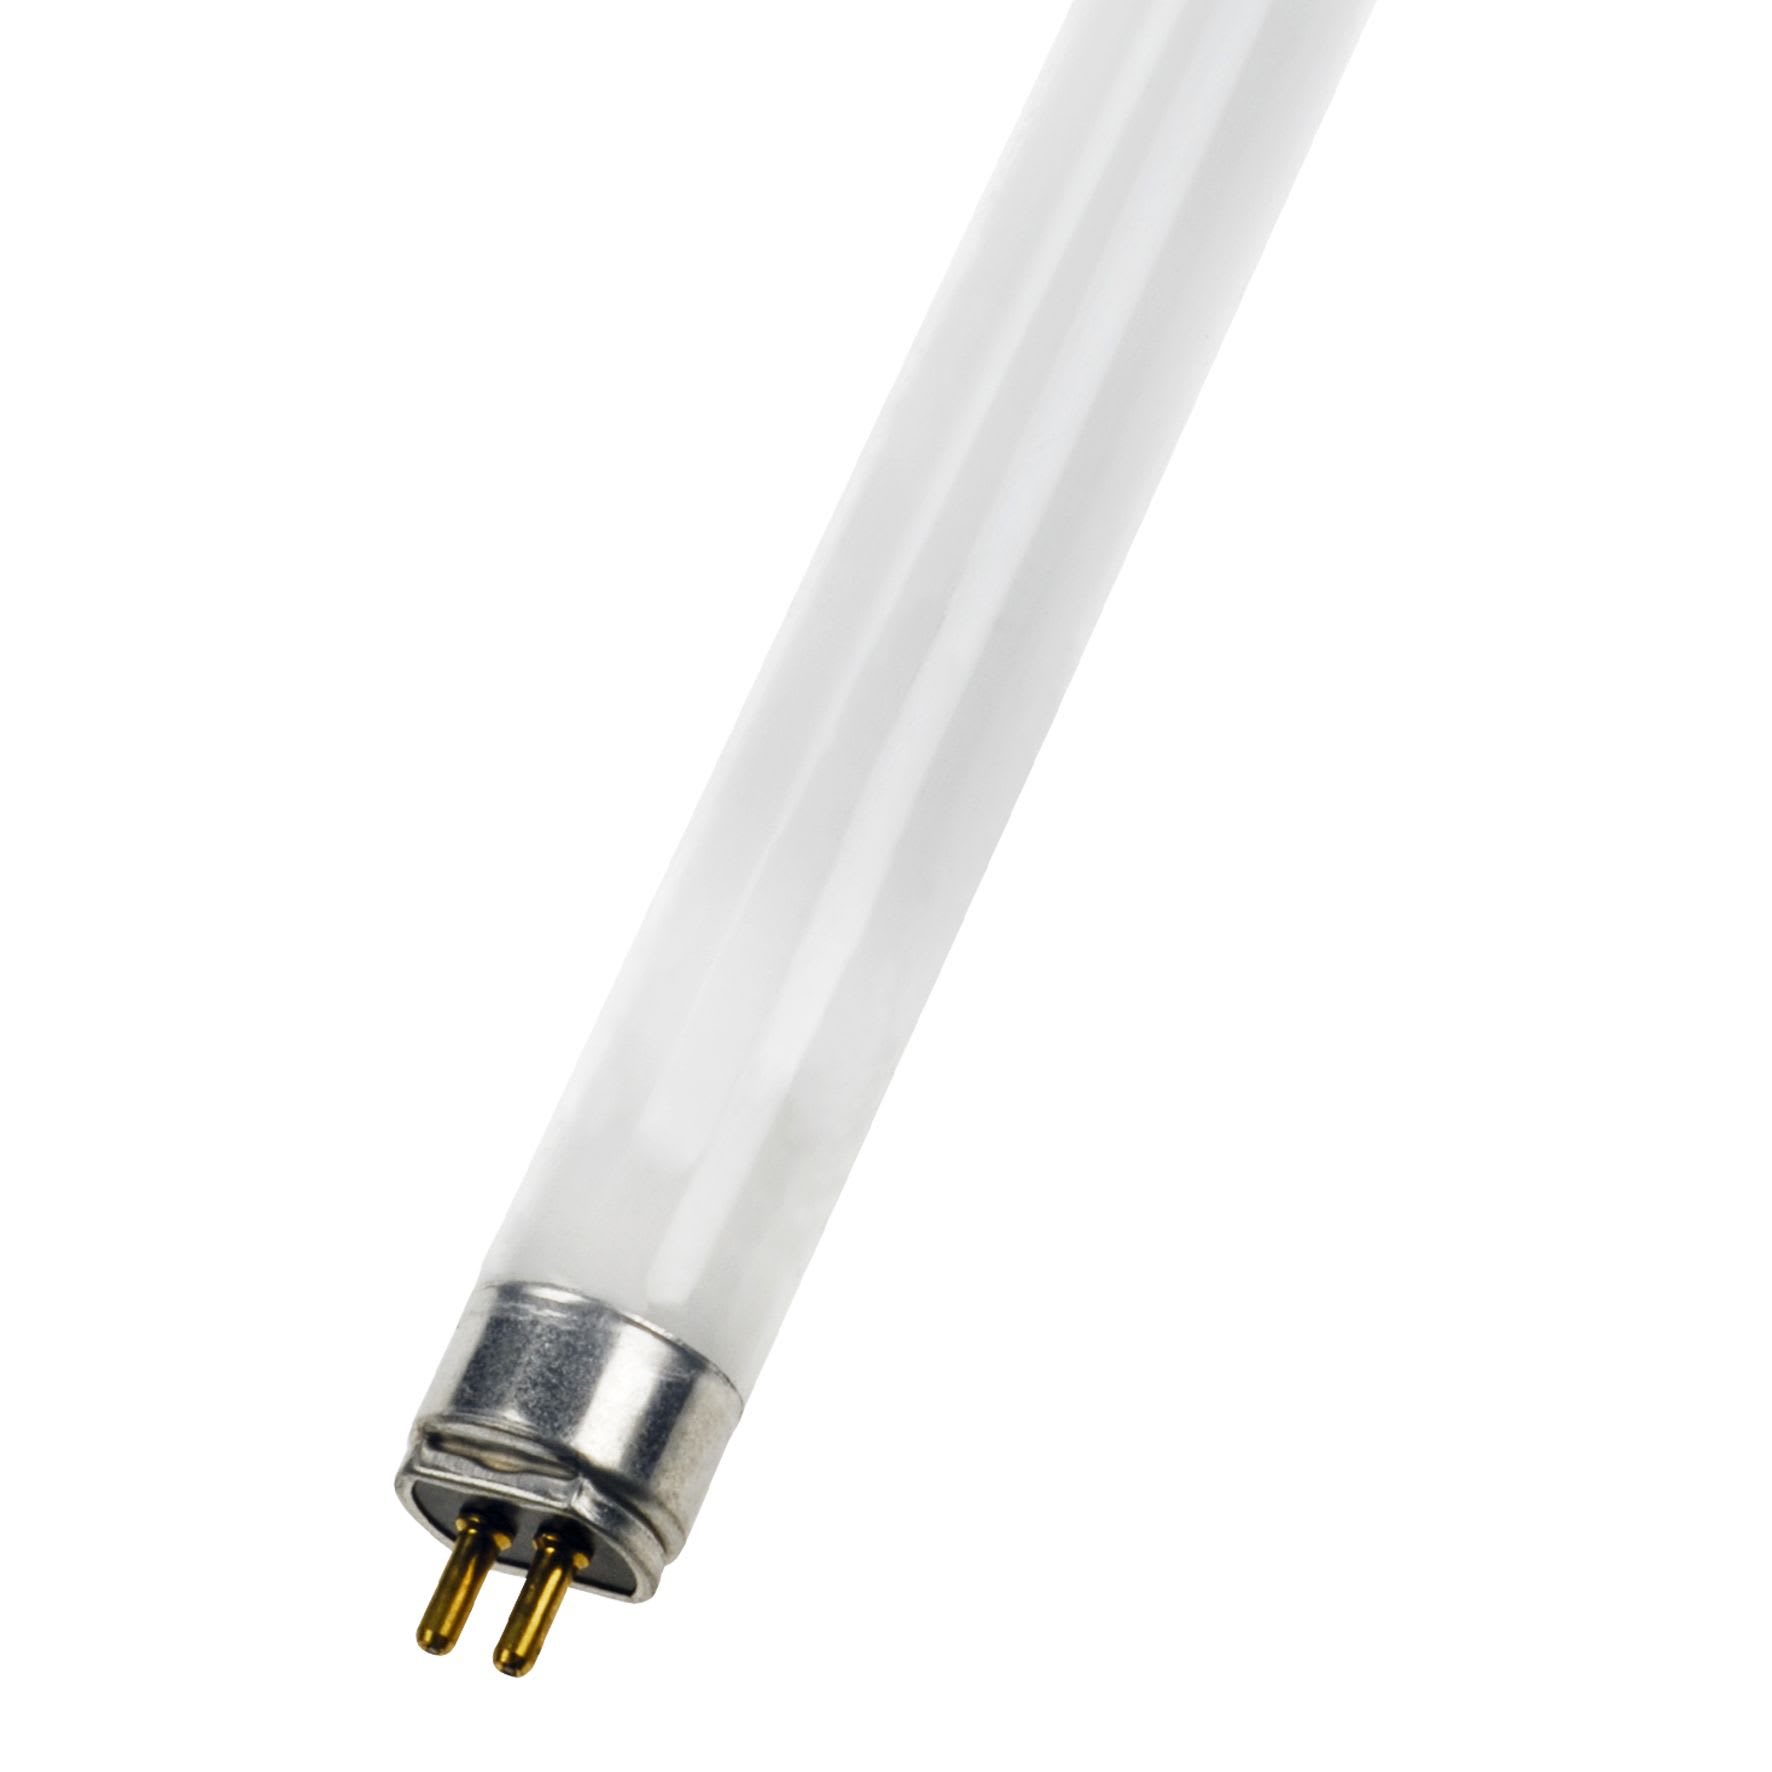 Bailey - PHI MASTER Tube fluorescent TL5 HE G5 1149mm 28W 840